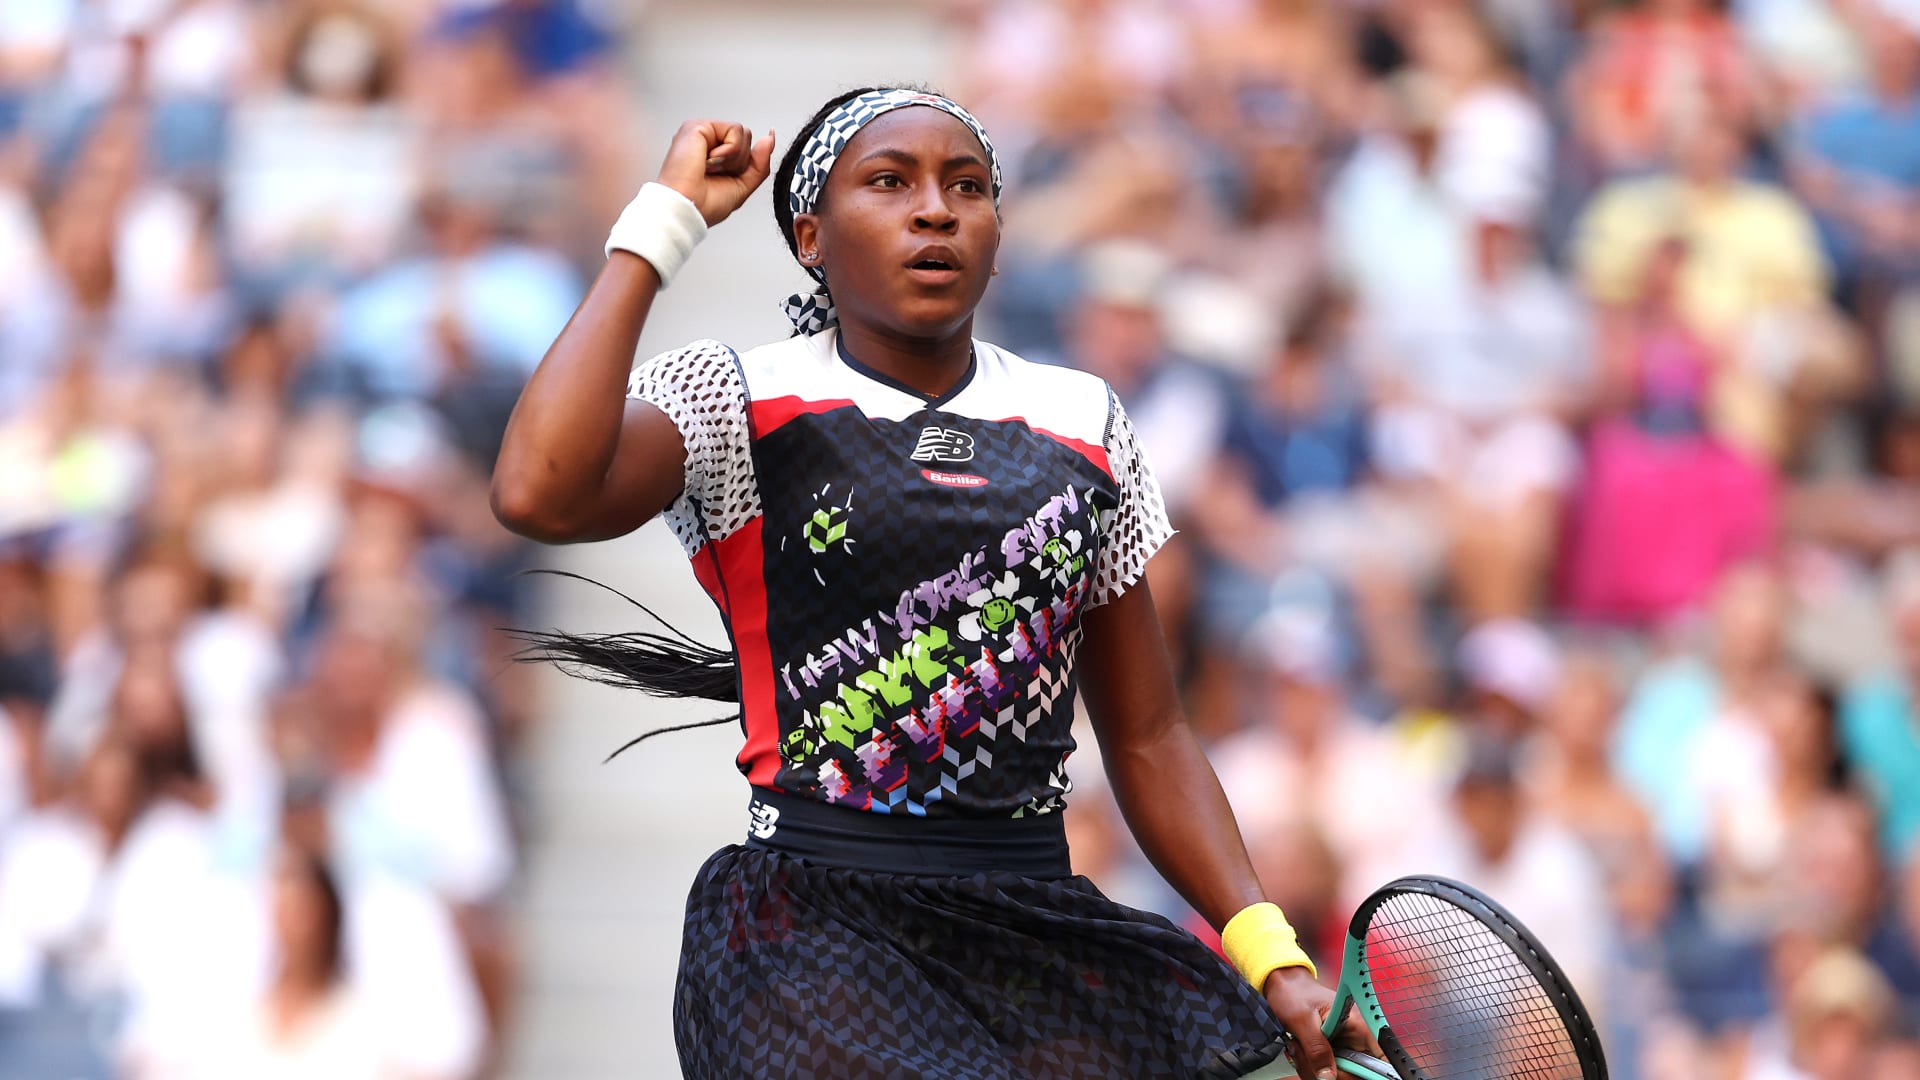 Stat of the Day Coco Gauff to become youngest player to compete in both singles and doubles at WTA Finals in same year since Anna Kournikova in 1999